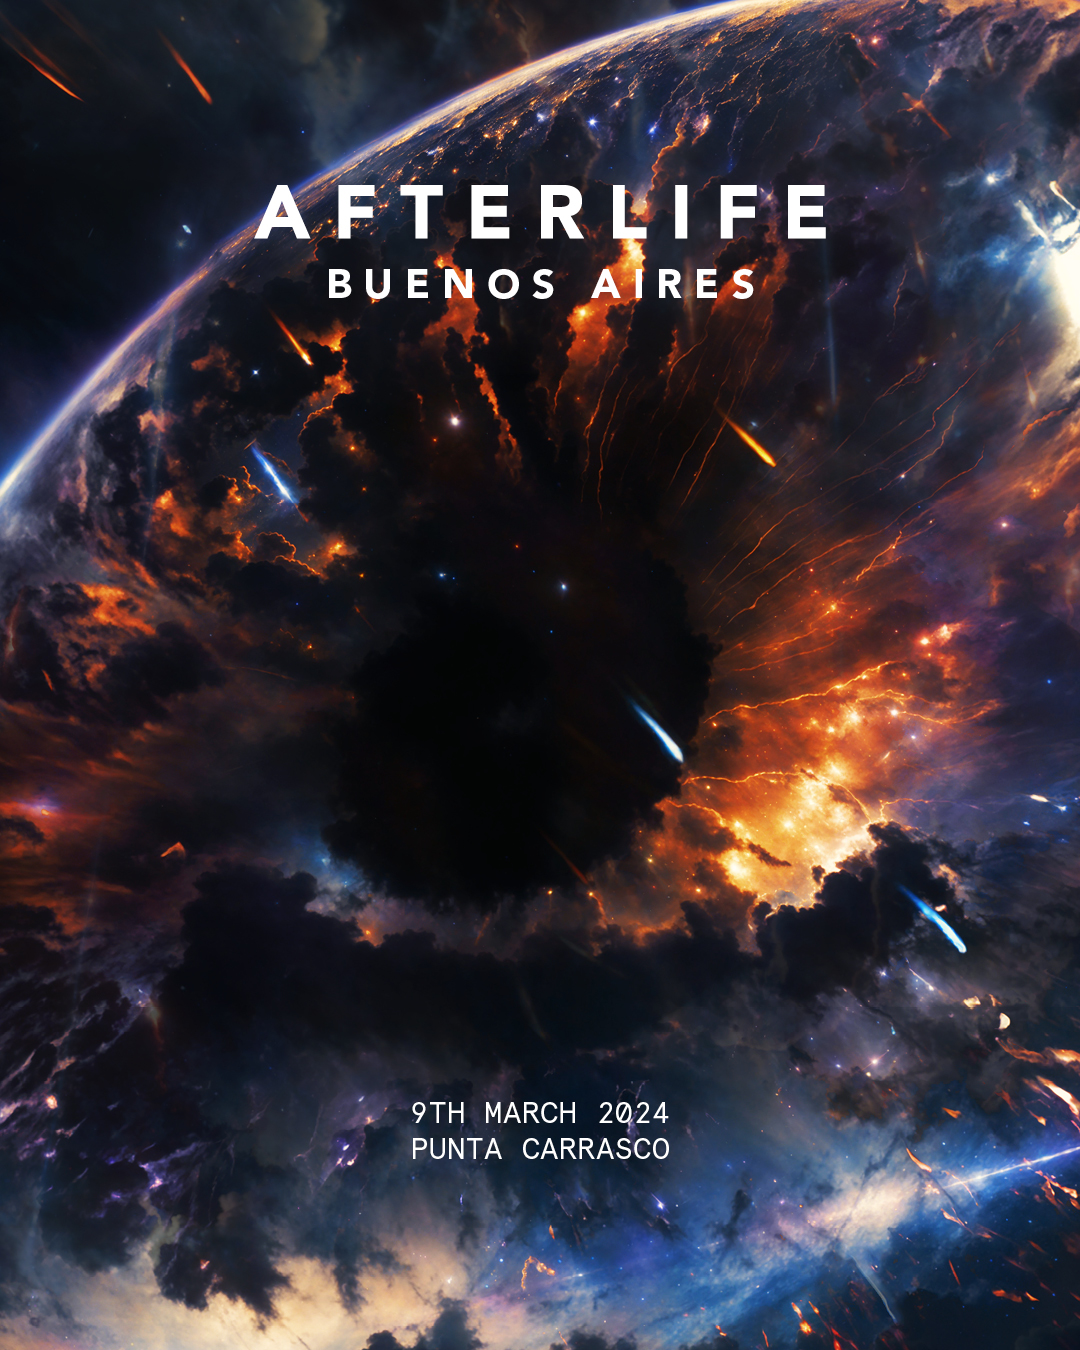 Afterlife Los Angeles Premier 🥹 Festival Spoilers Ahead! Relive